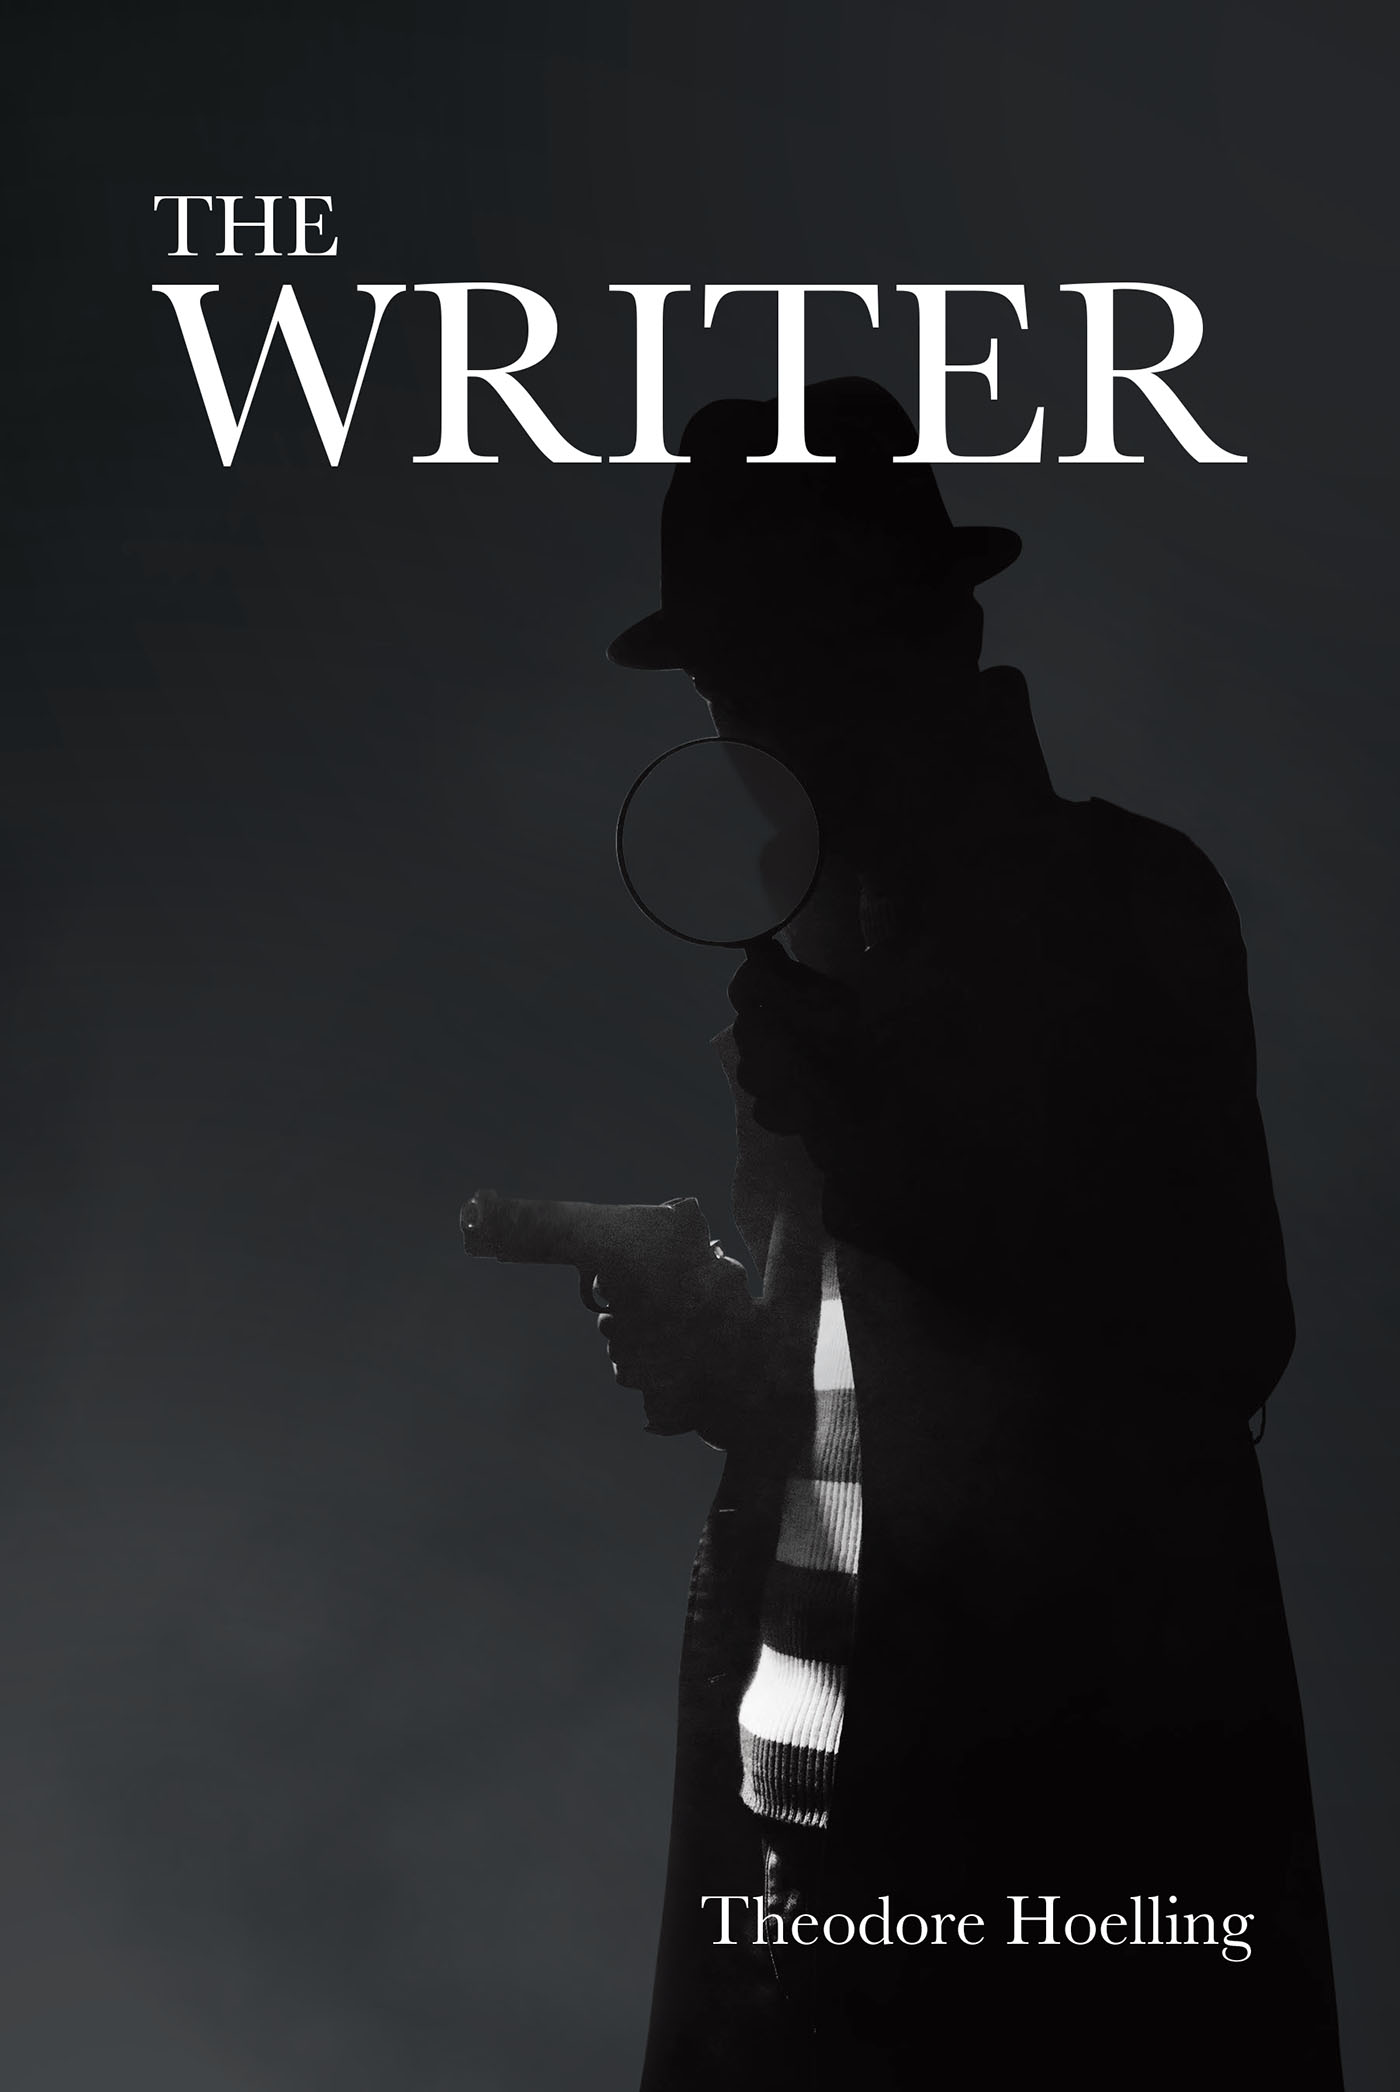 The Writer Cover Image